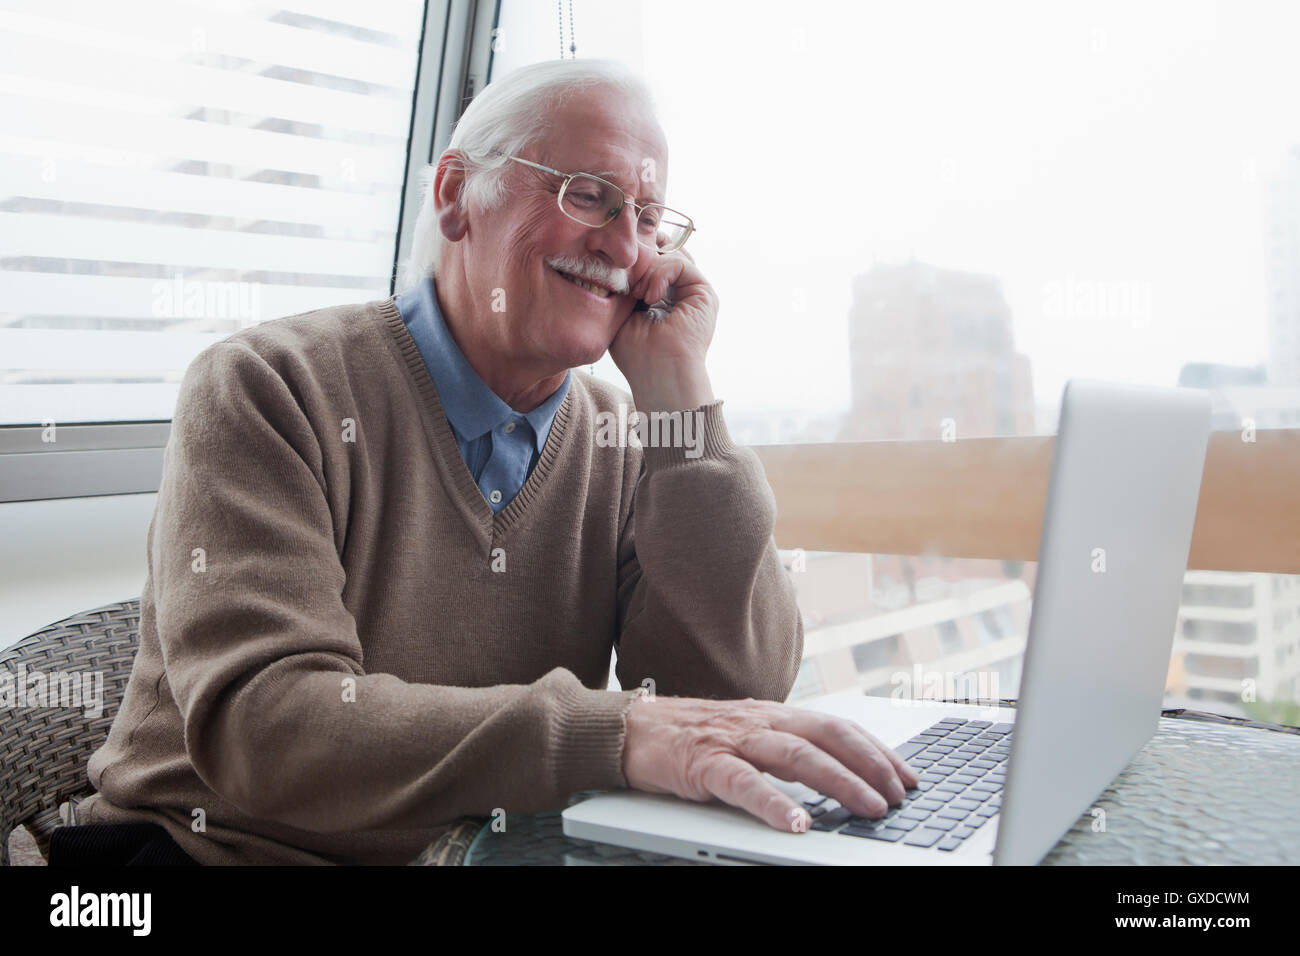 Senior man using mobile phone and laptop at home Banque D'Images